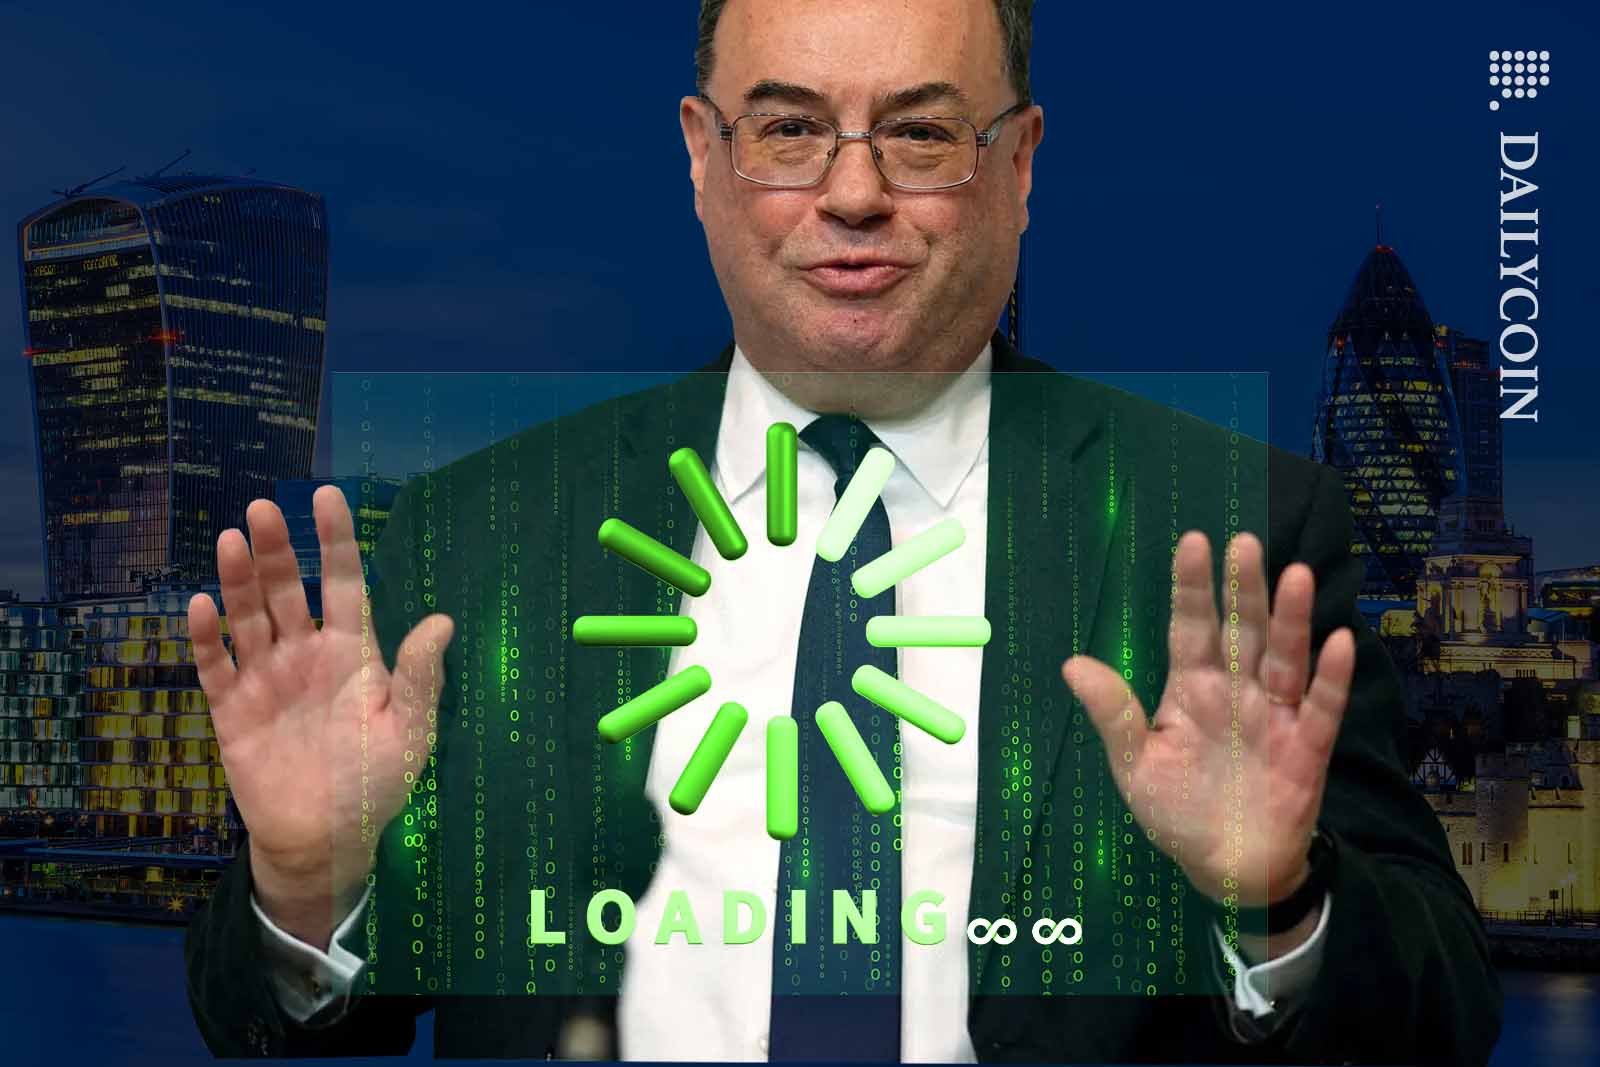 Bank of England Governor Andrew Bailey showing a screen which is loading forever.